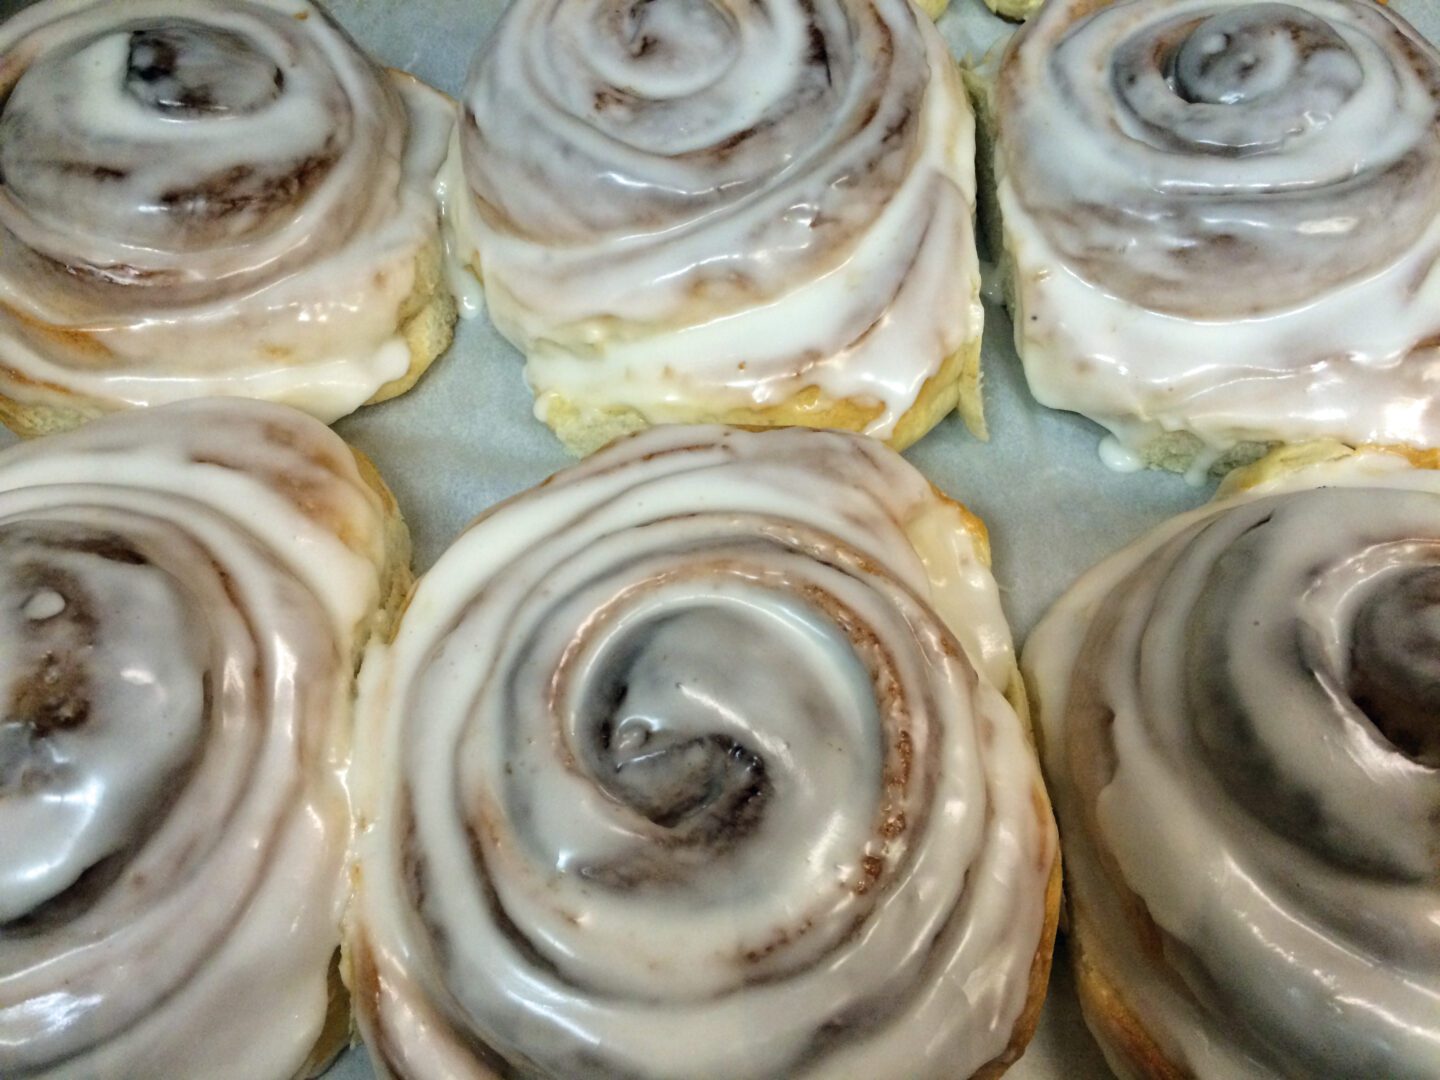 Cinnamon rolls with icing on a baking sheet.